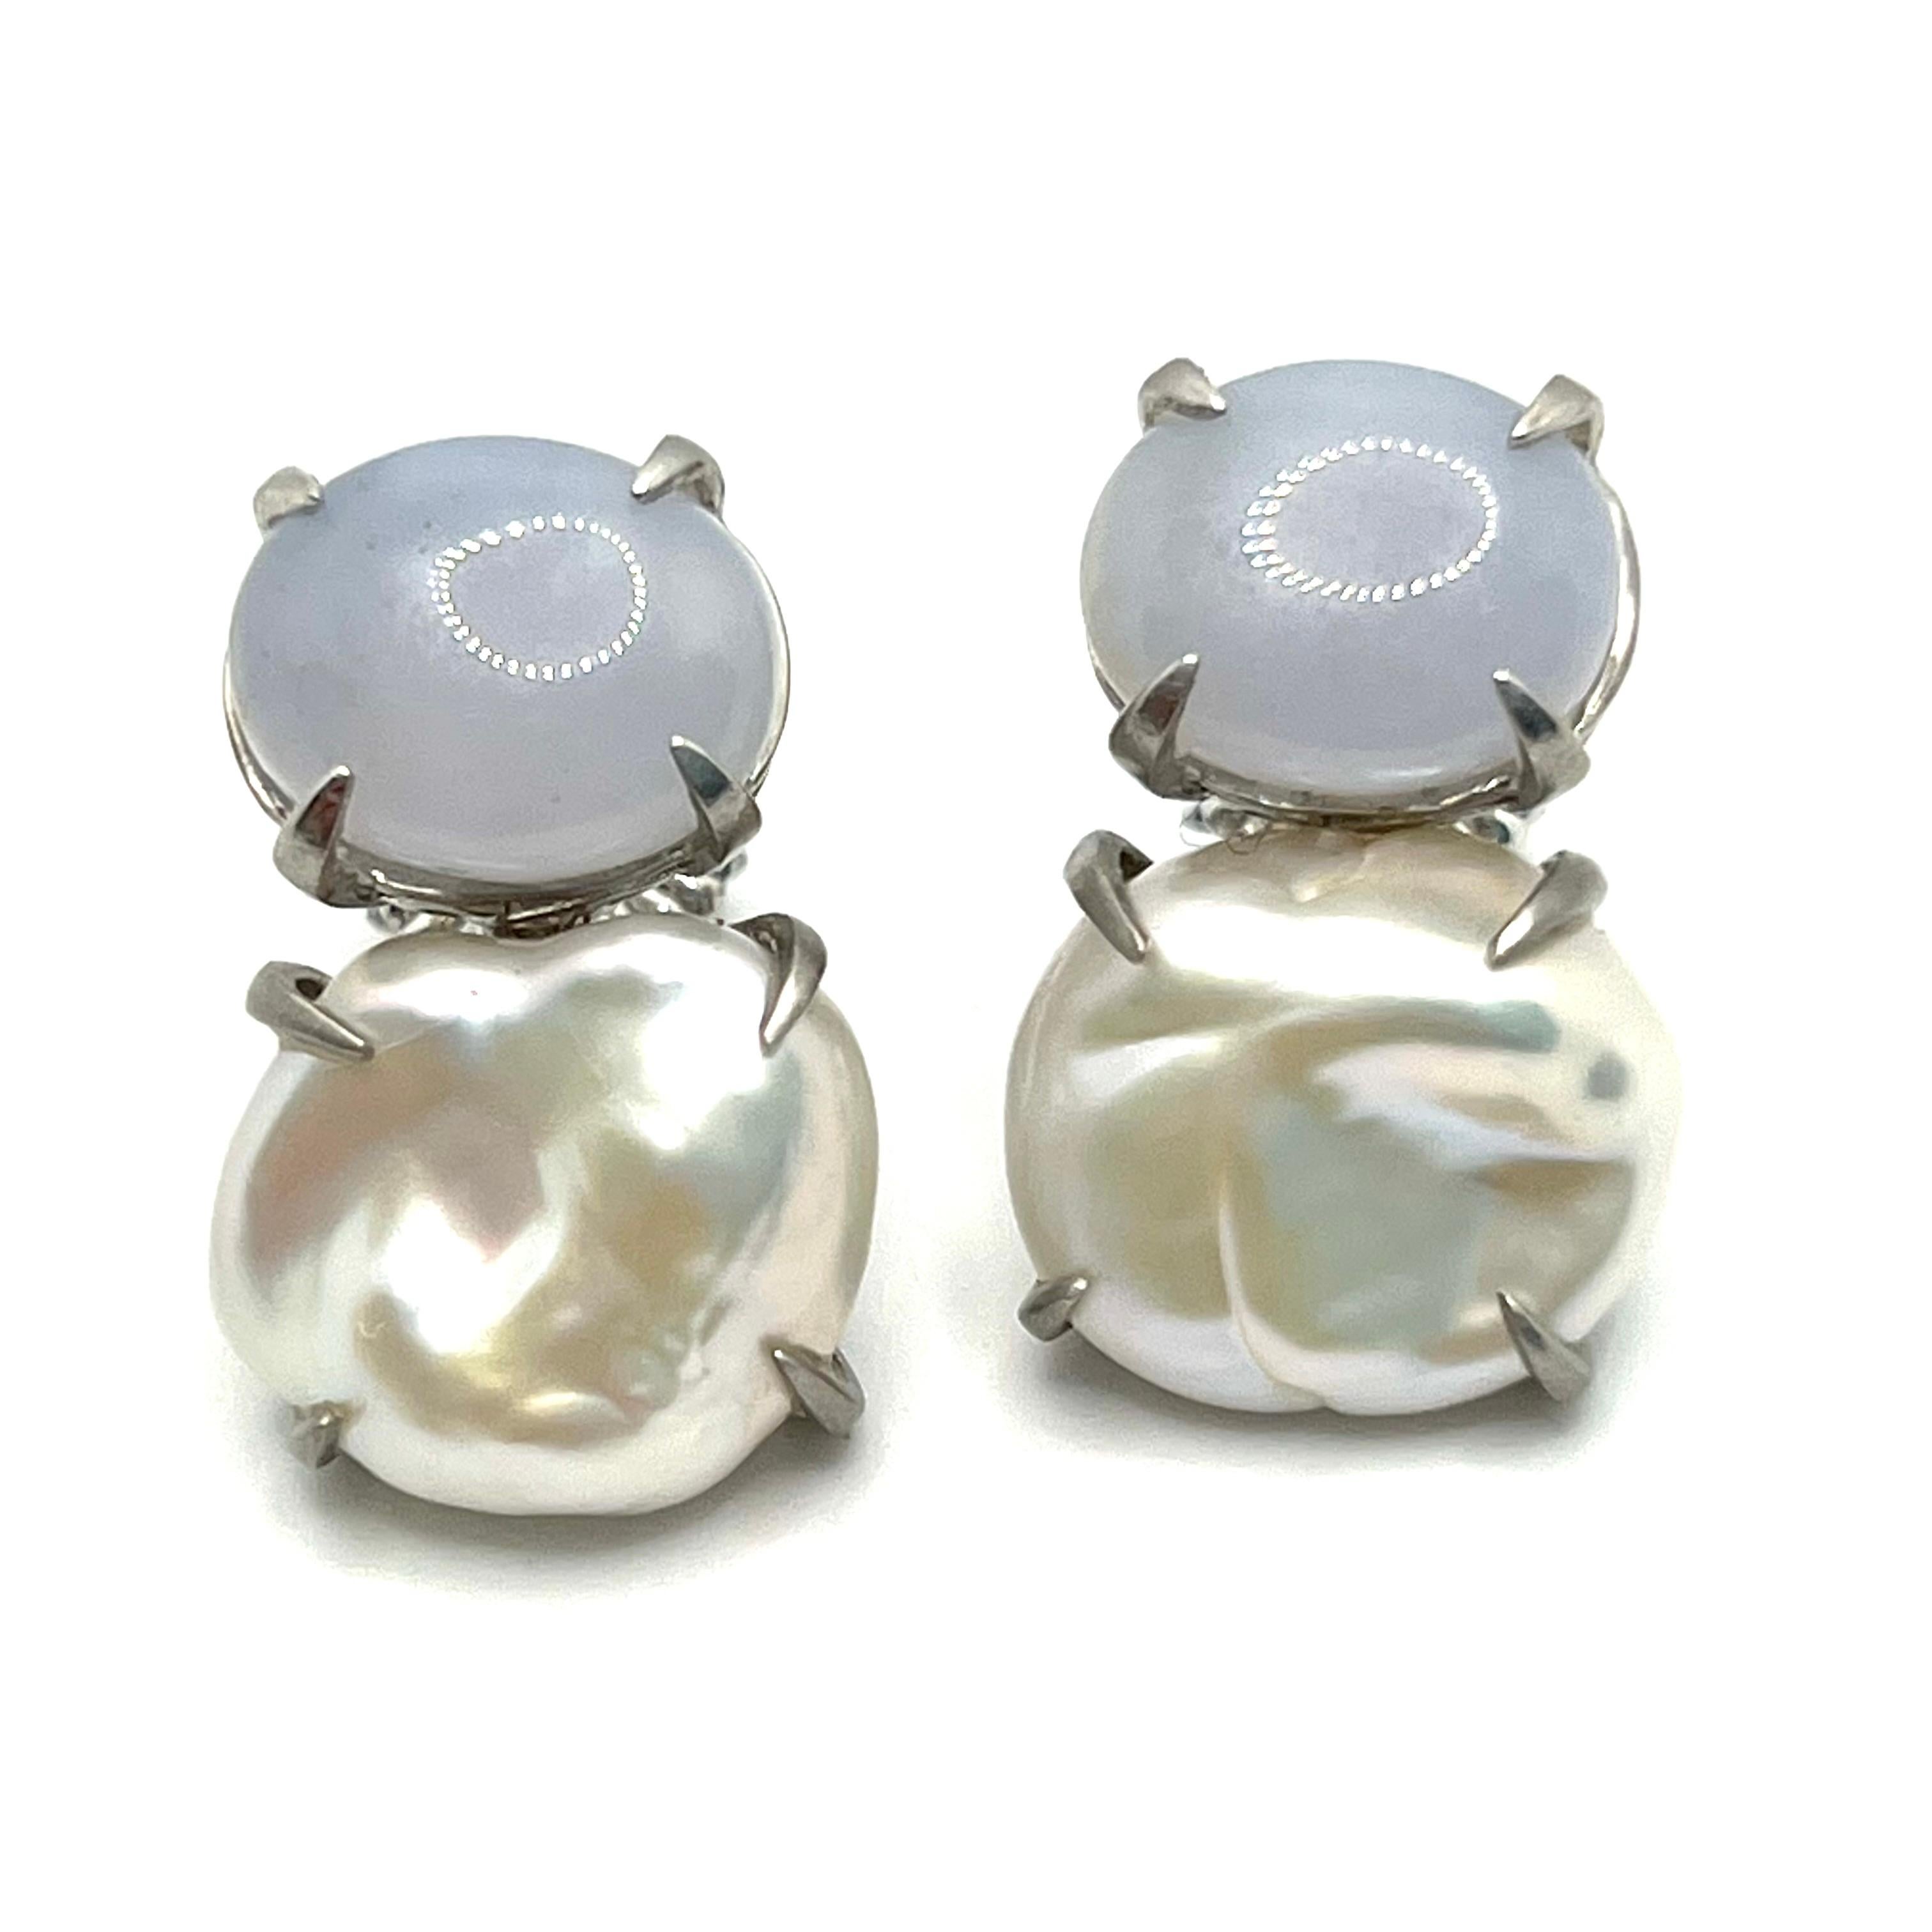 Bijoux Num Oval Cabochon Chalcedony and Keishi Pearl Earrings. 

The stunning pair of earrings feature beautiful genuine oval cabochon-cut chalcedony and lustrous cultured Japanese Keishi pearl, handset in platinum rhodium plated sterling silver